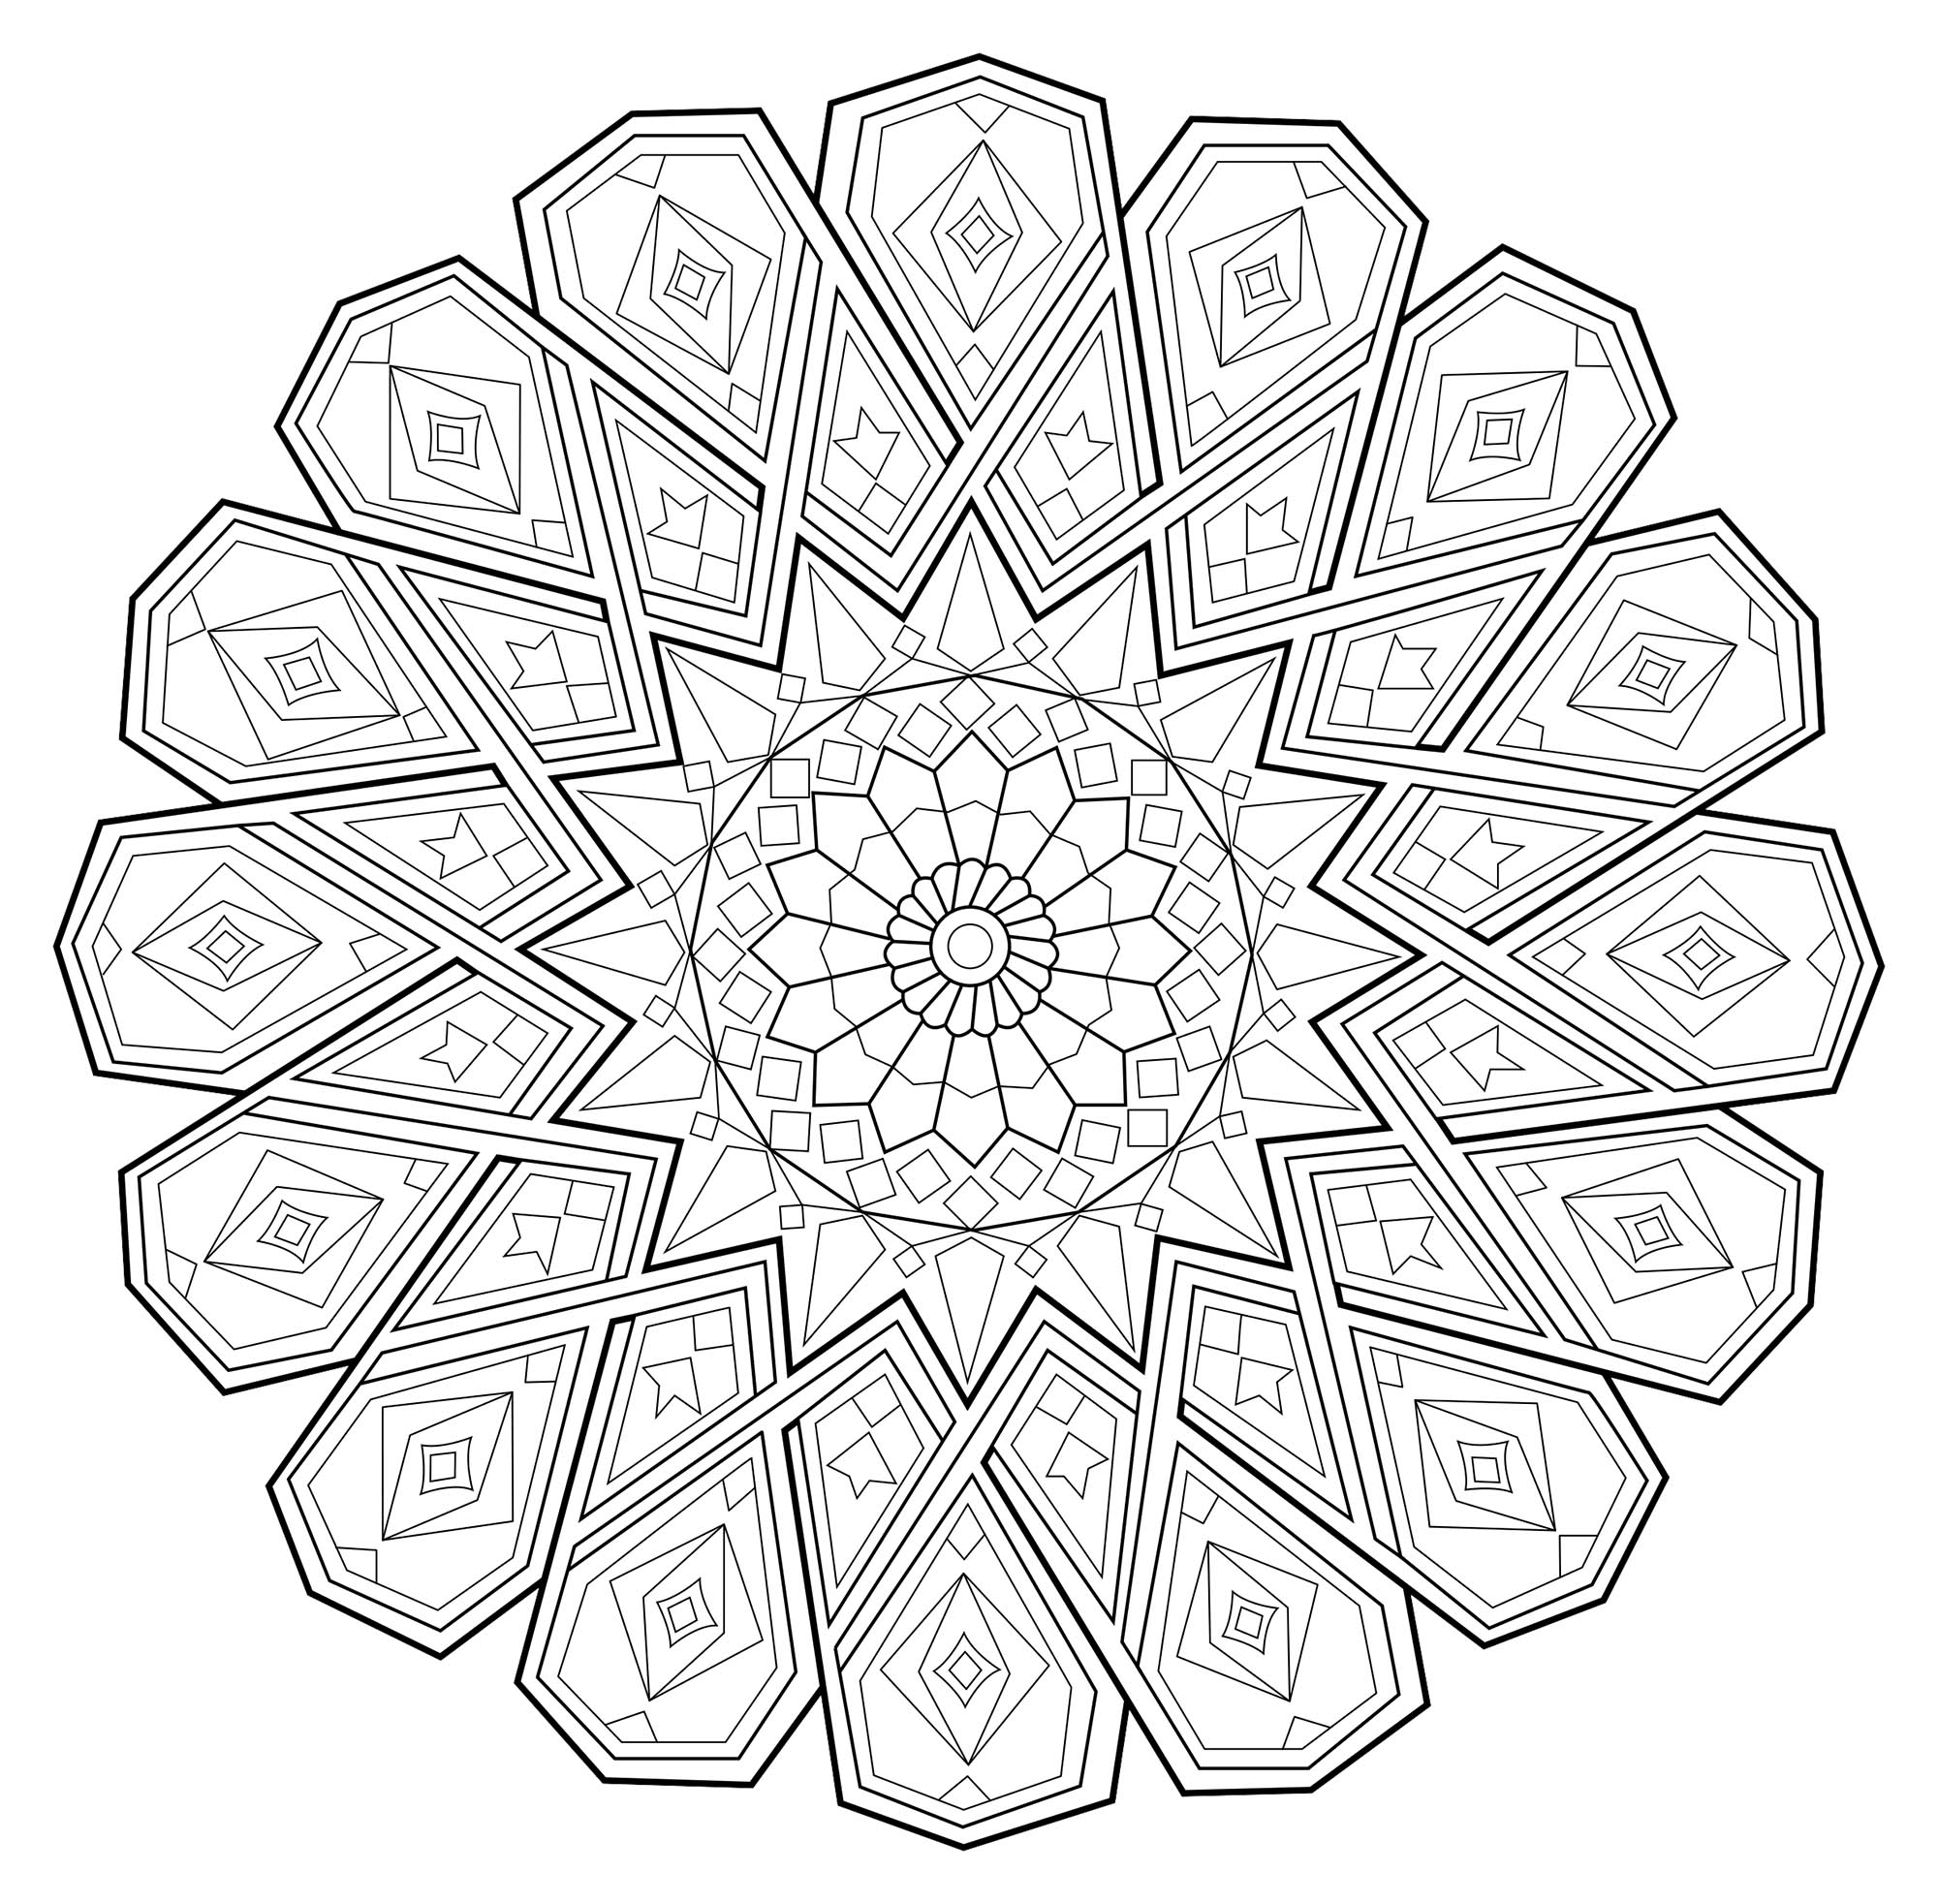 A Mandala coloring page with a lot of details, perfect if you like complex coloring pages, and if you like to express your creativity.